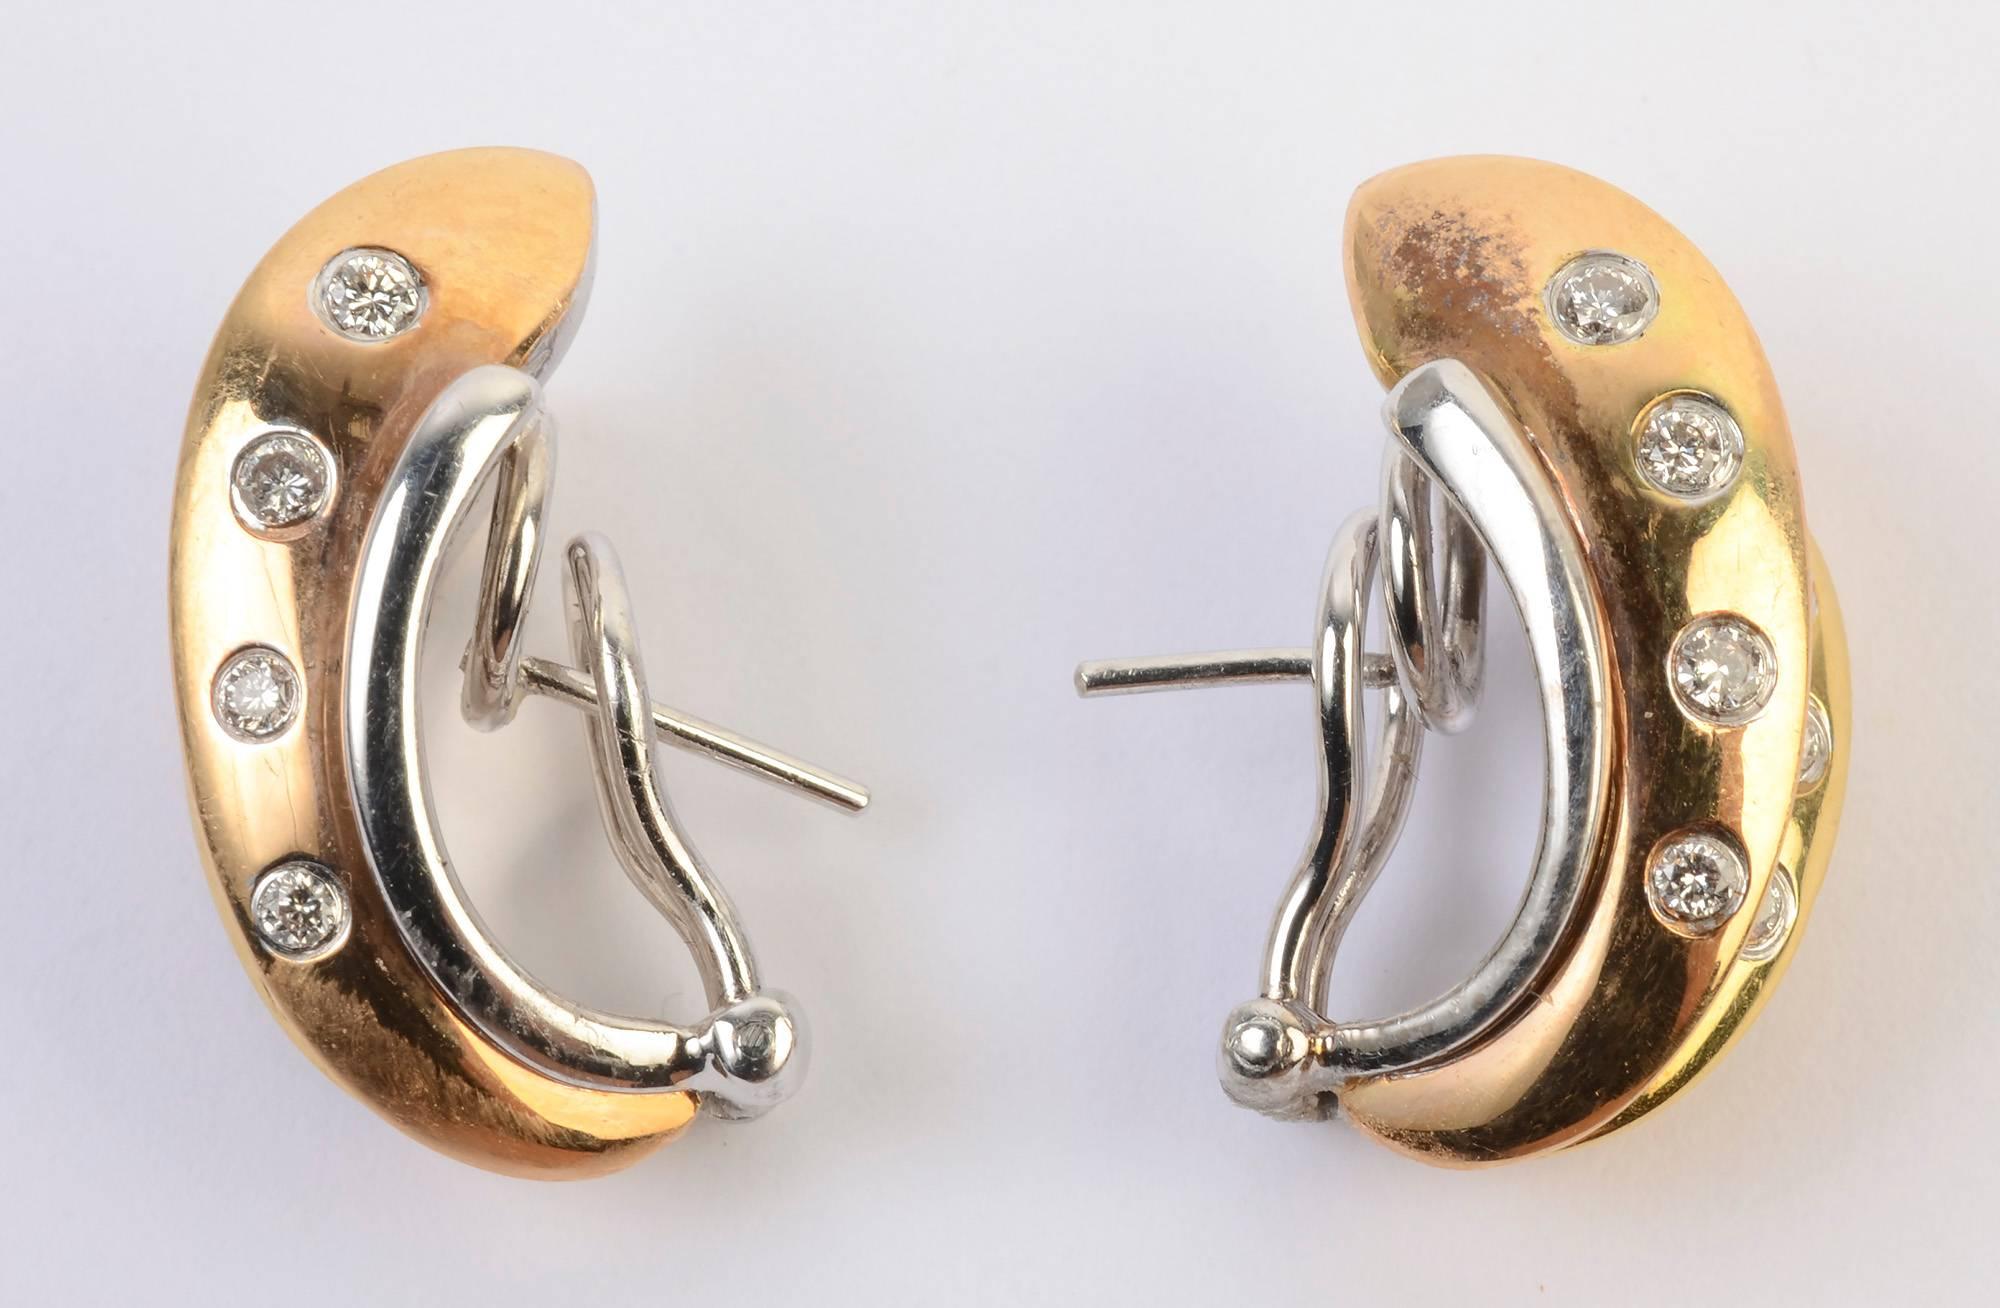 Irregular hoop earrings of yellow and white gold with diamonds. The hoop shapes are four different size and forms, alternating white and yellow color. Backs are posts and clips.  Measurements are 7/8" x 1/2". 